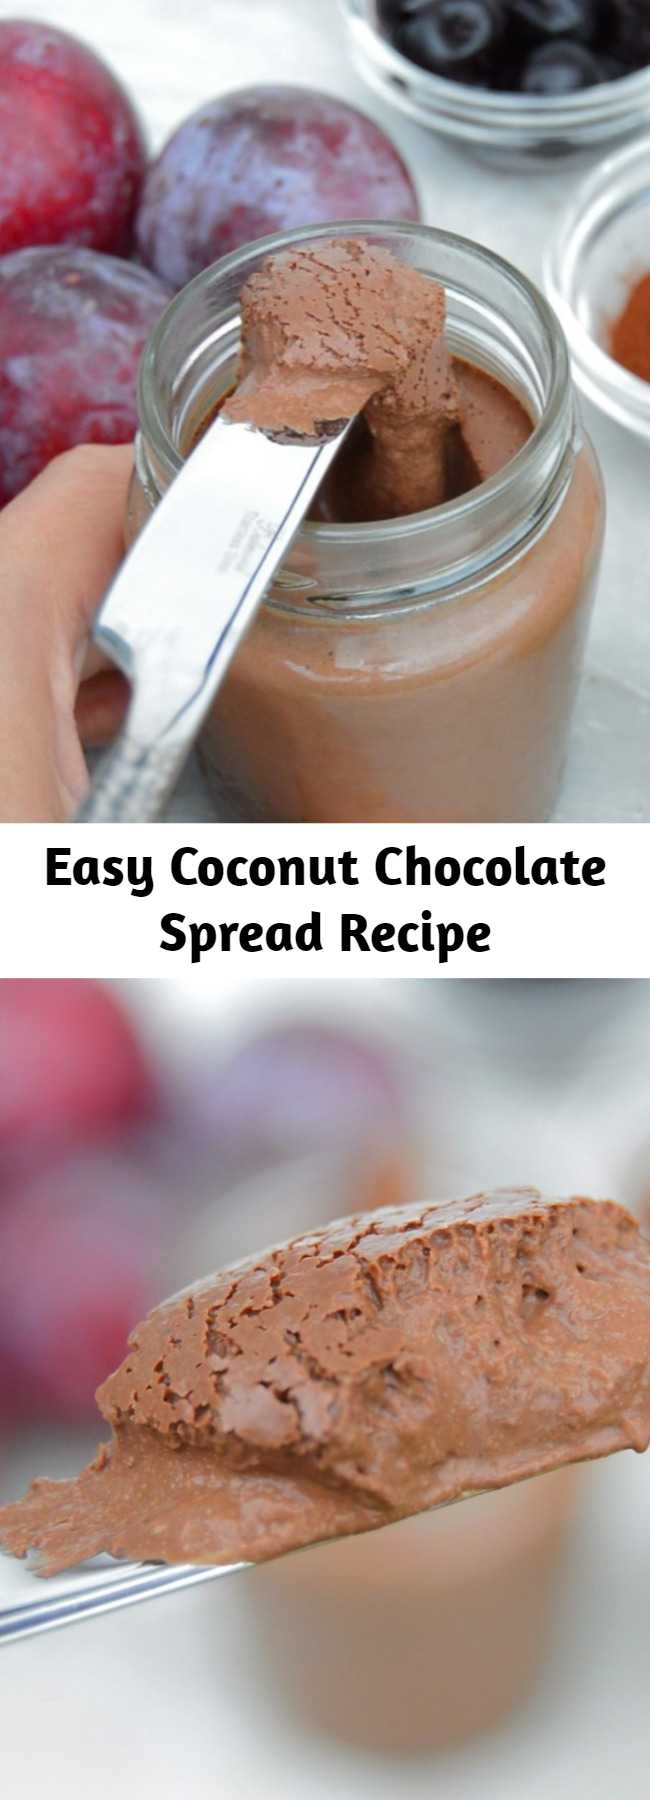 Easy Coconut Chocolate Spread Recipe - Dairy free chocolate spread that takes a few minutes to make. Perfect on hot bread, crackers or just eaten with a spoon. Rich and creamy thanks to coconut that gives an amazing taste and texture. #vegan #chocolate #chocolatespread #veganrecipe